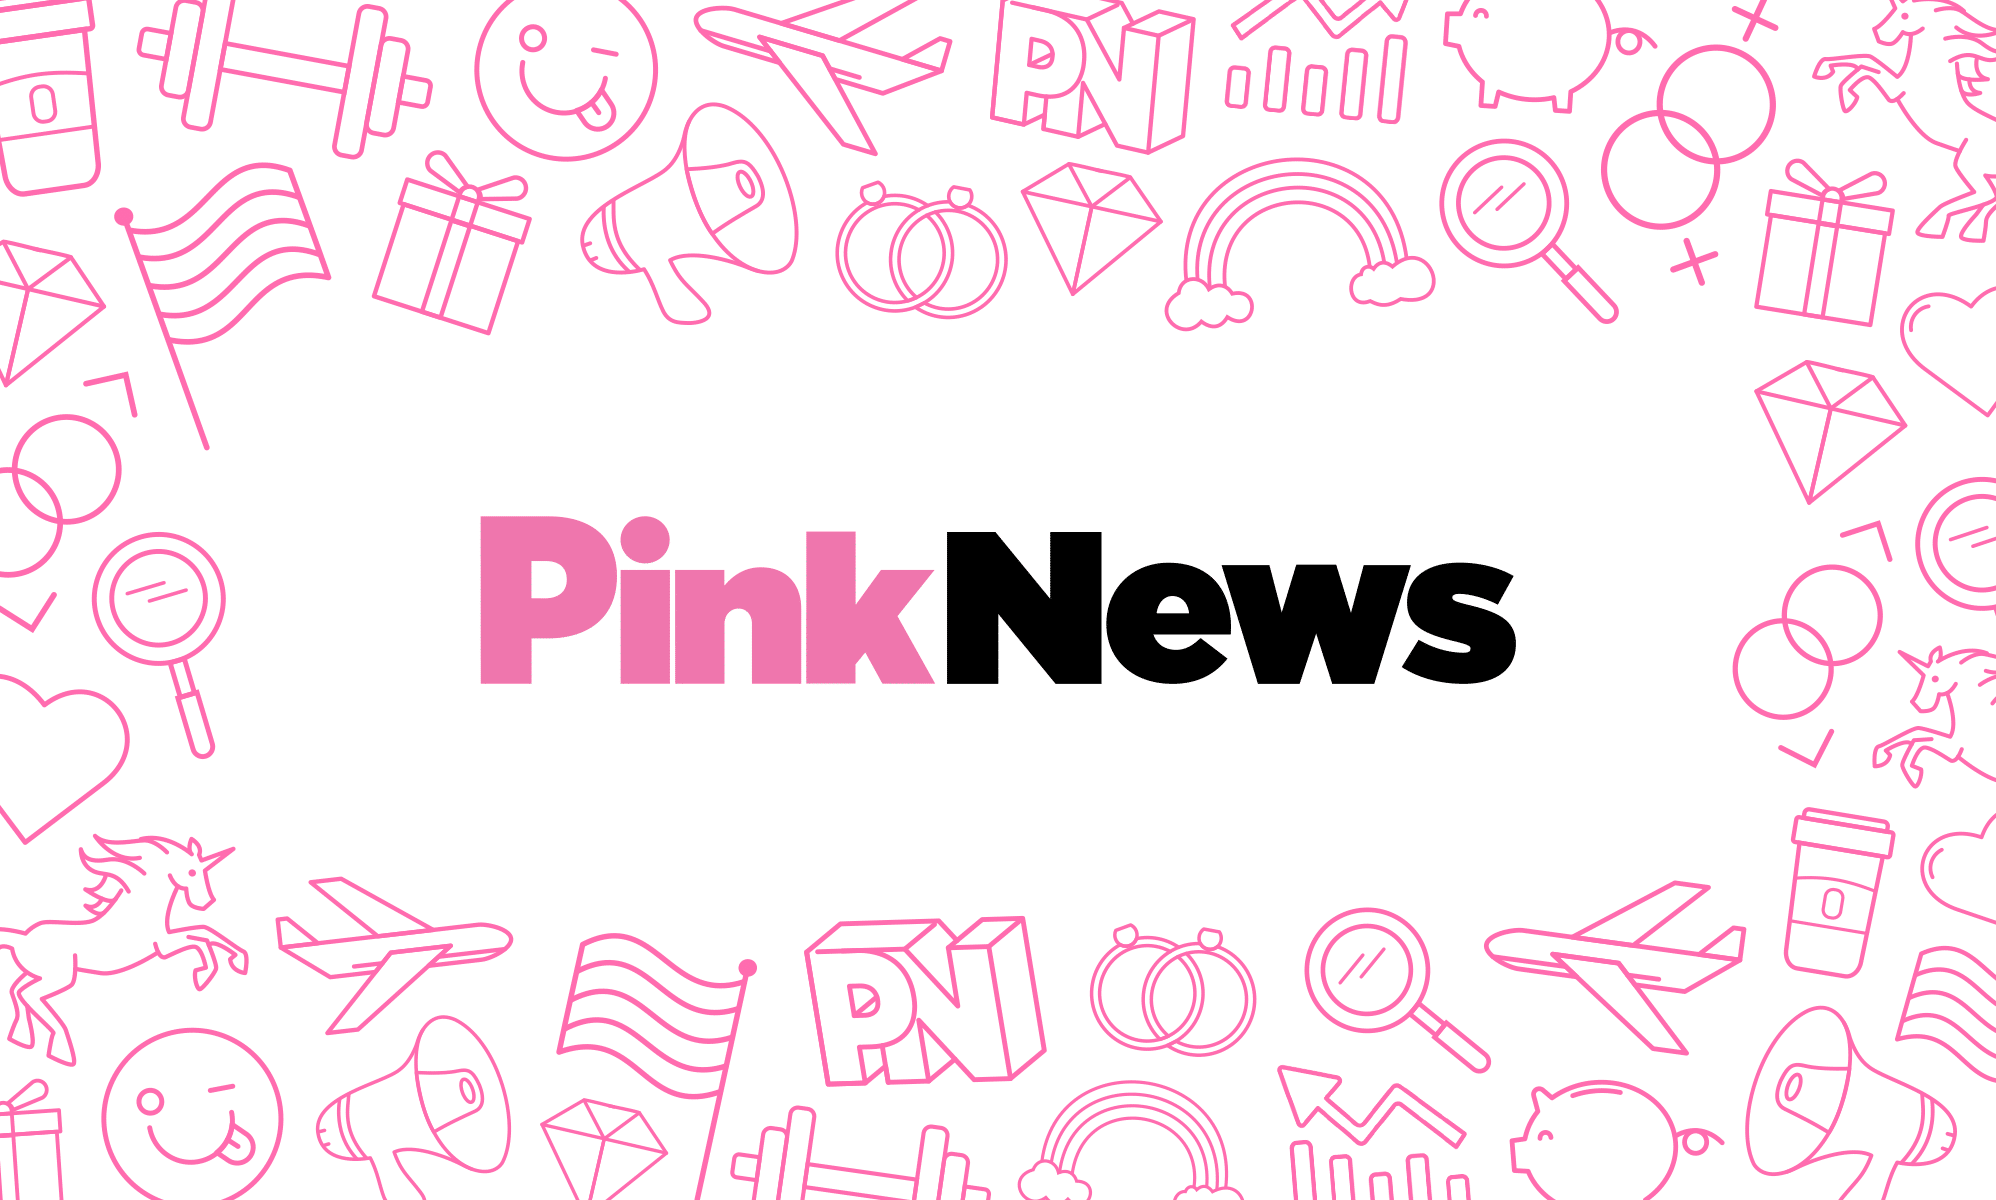 Submit your questions for Natalie Bennett&#8217;s PinkNews readers&#8217; Q&#038;A